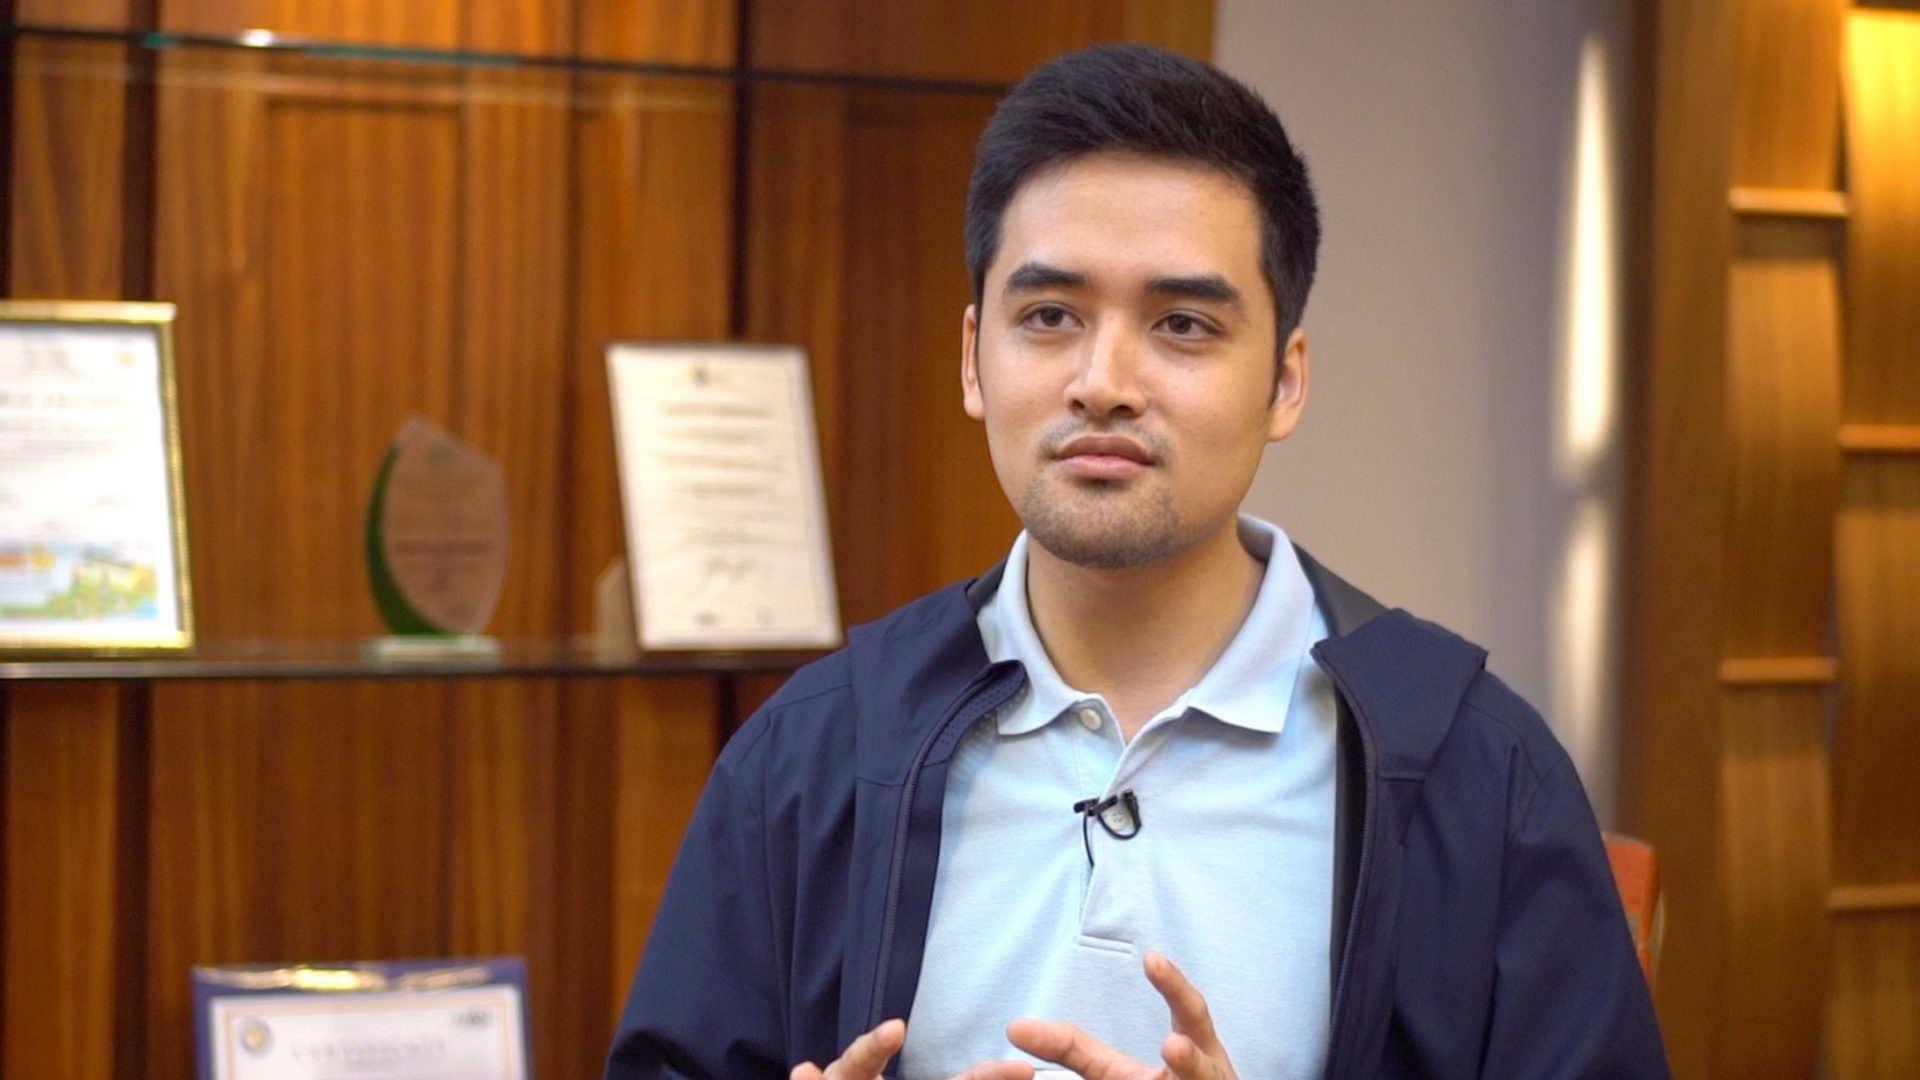 DOJ ‘leaves it to NBI’ to decide legality of own probe on Vico Sotto